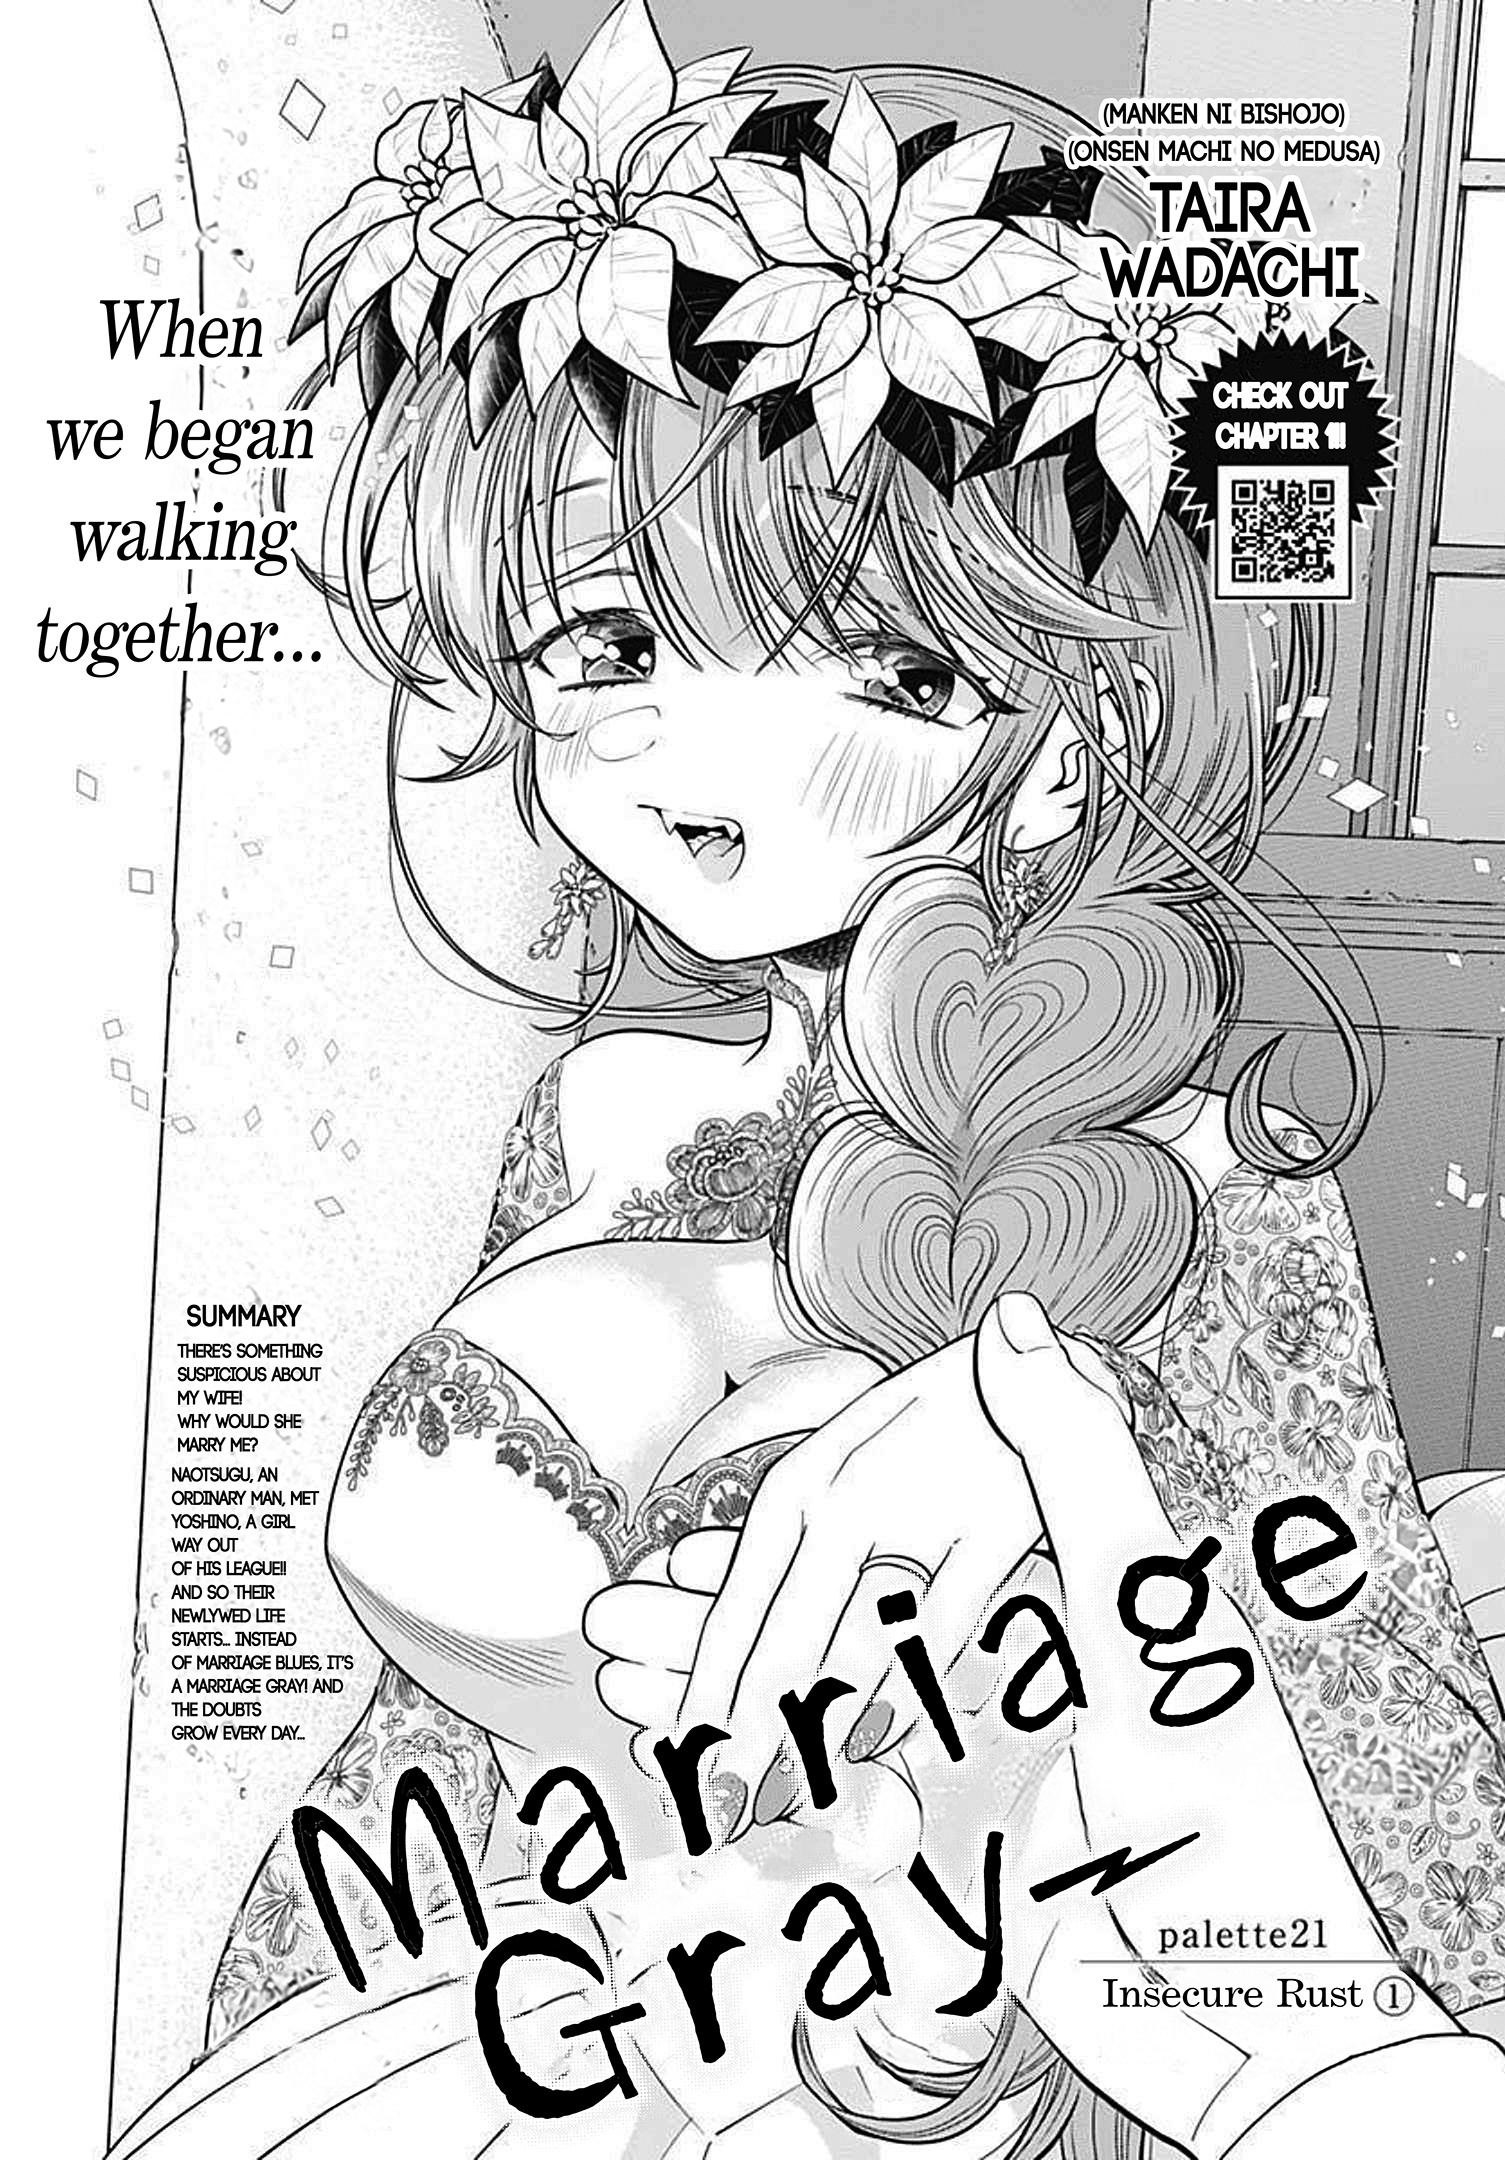 Marriage Gray Vol.2 Chapter 21: Insecure Rust 1 - Picture 1